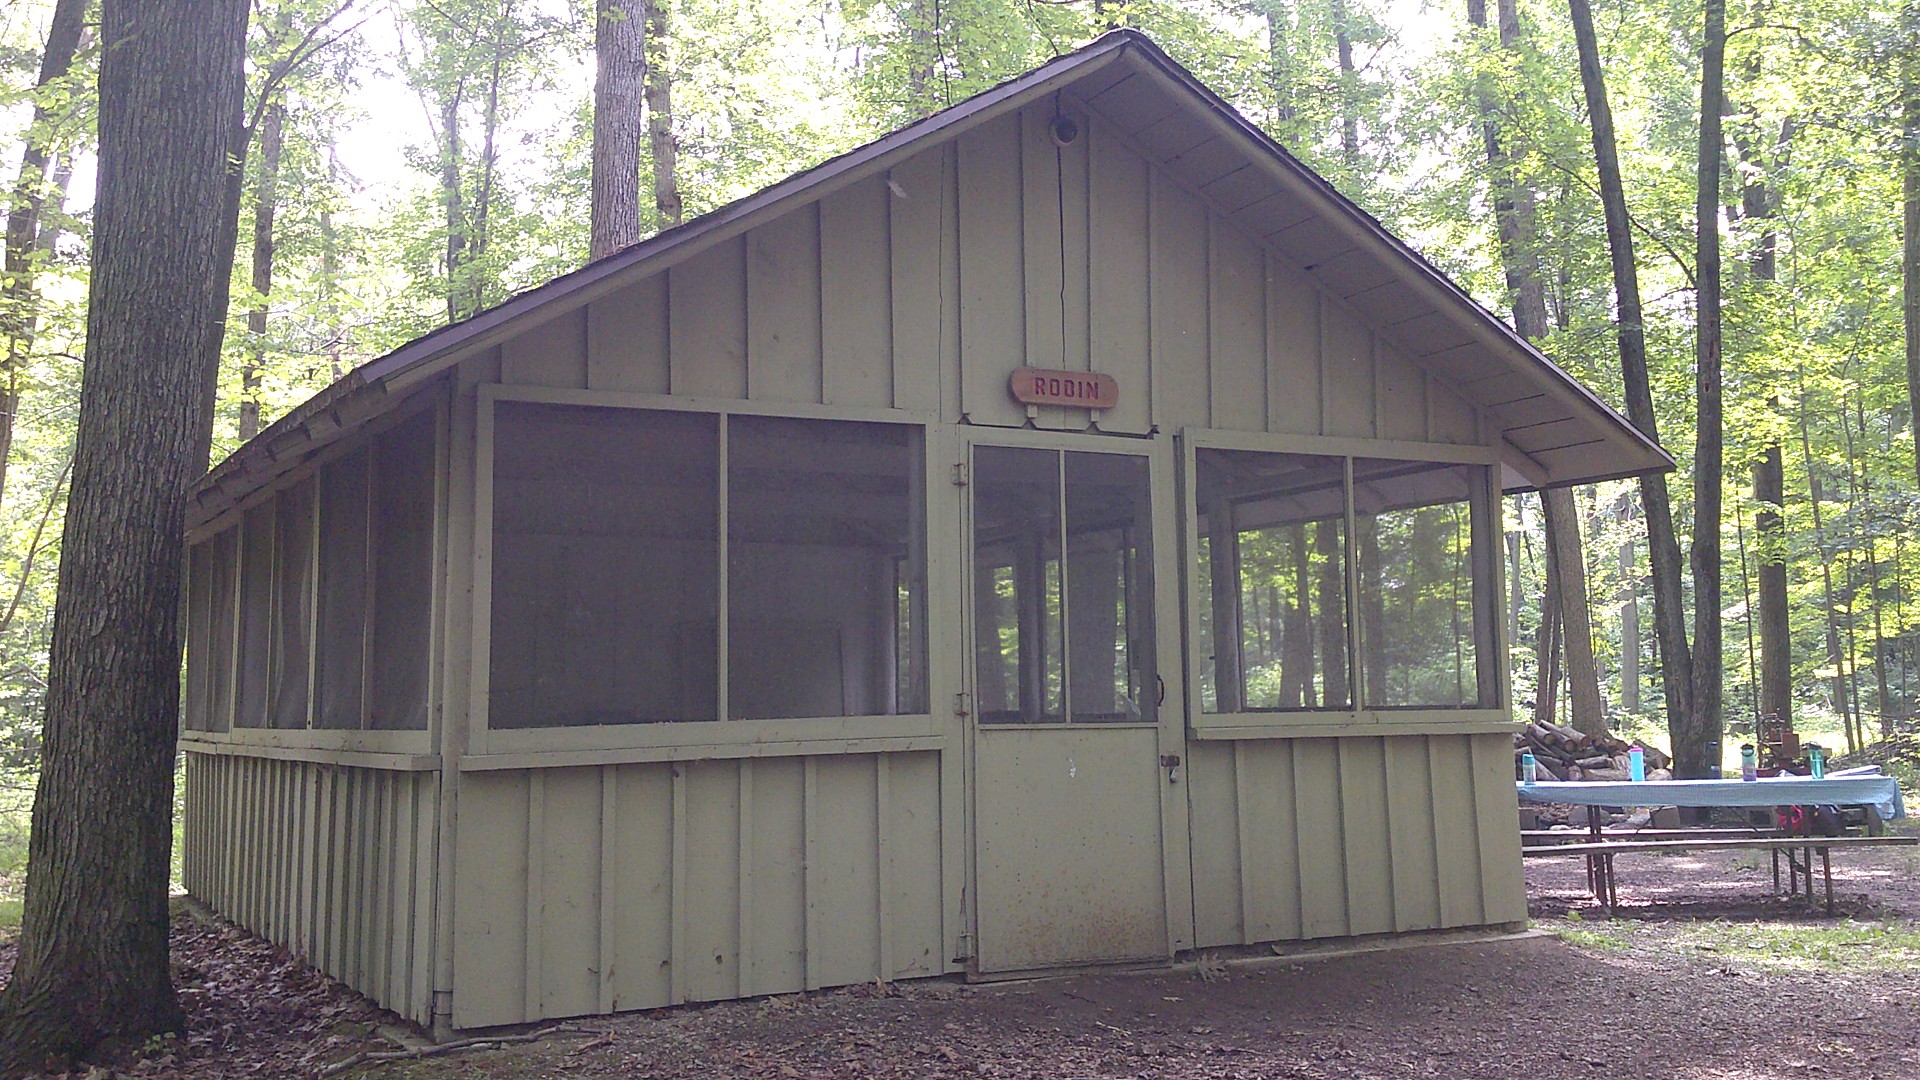 City of Kaukauna considers option to purchase soon-to-be-sold Girl Scout camp